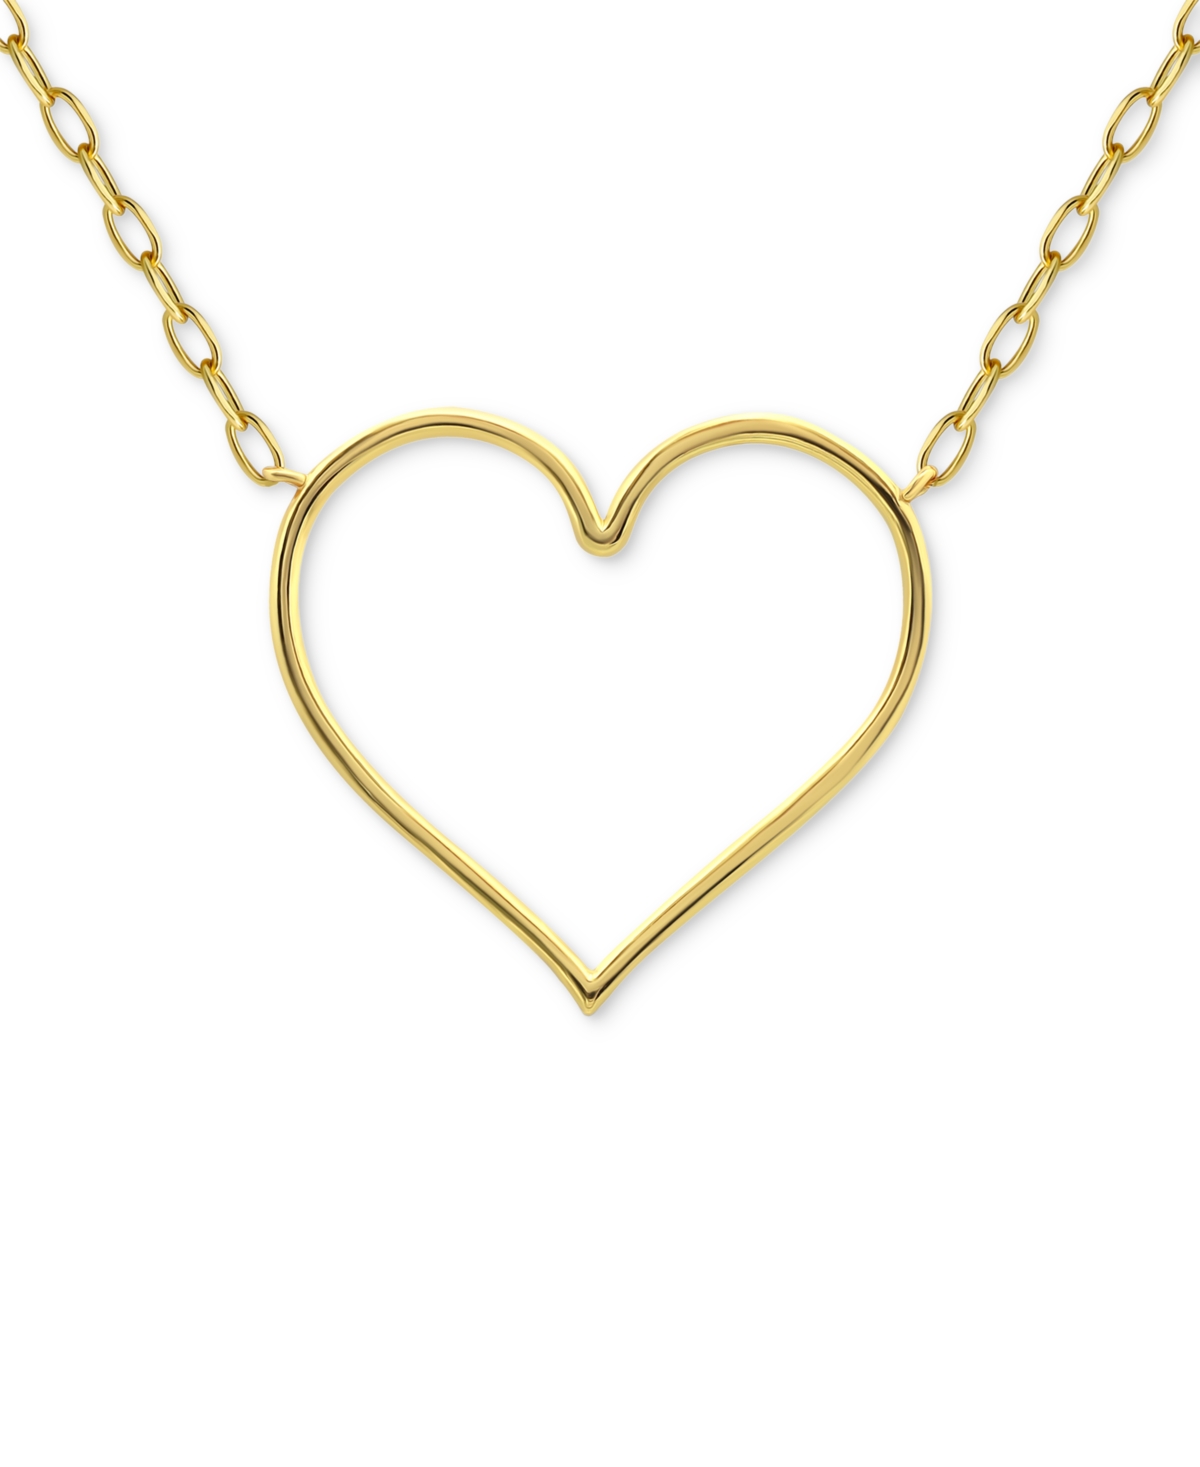 Giani Bernini Open Heart Pendant Necklace, 16" + 2" Extender, Created For Macy's In Gold Over Silver